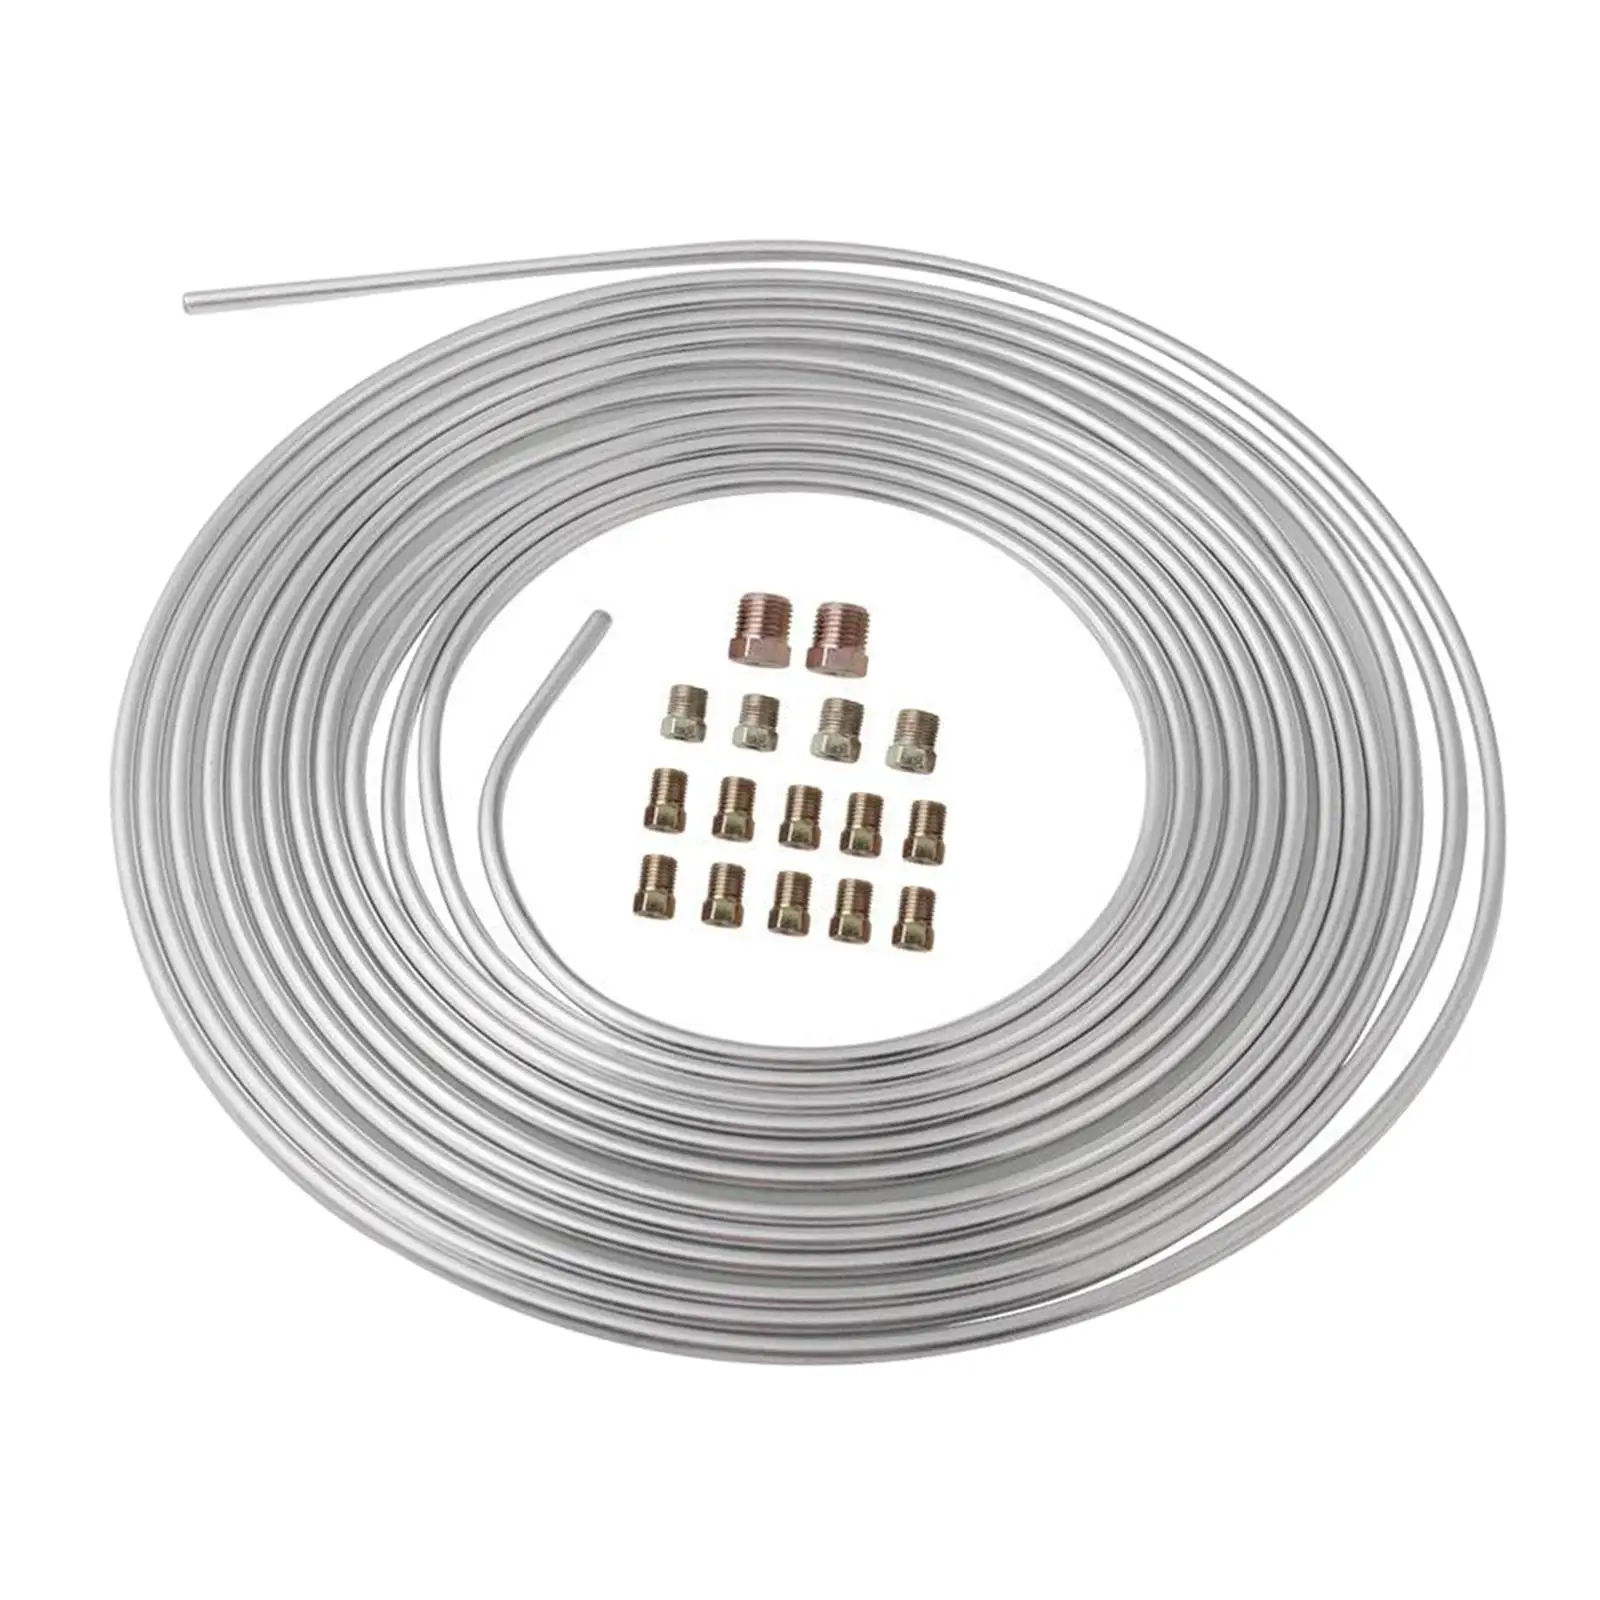 25ft Brake Line Anti-rust Accessories Auto Replacement Silver